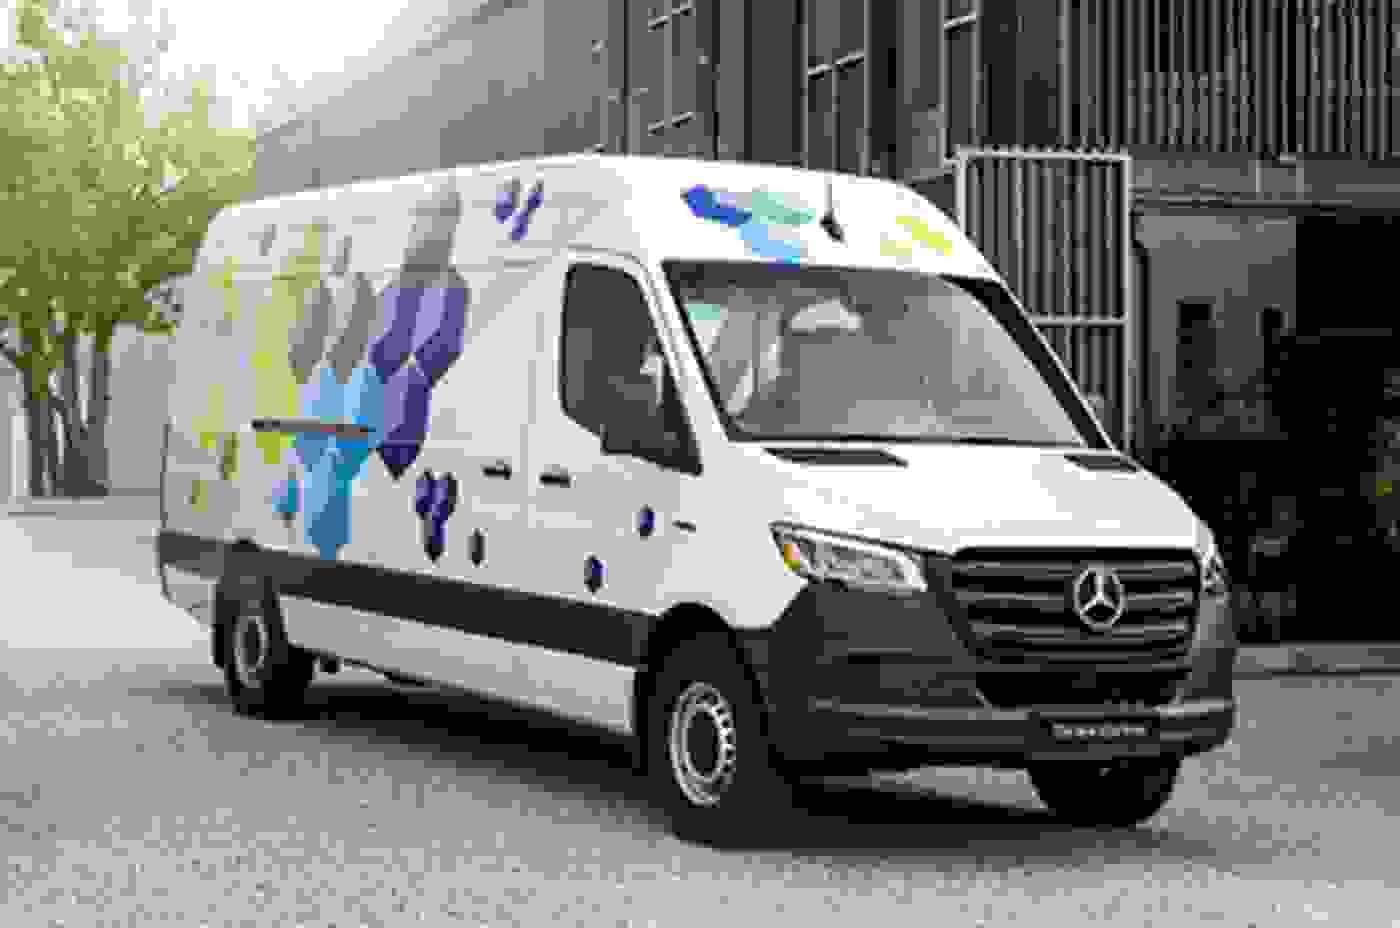 THE NEW ESPRINTER: THE MOST VERSATILE AND EFFICIENT MERCEDES-BENZ EVAN OF ALL TIME